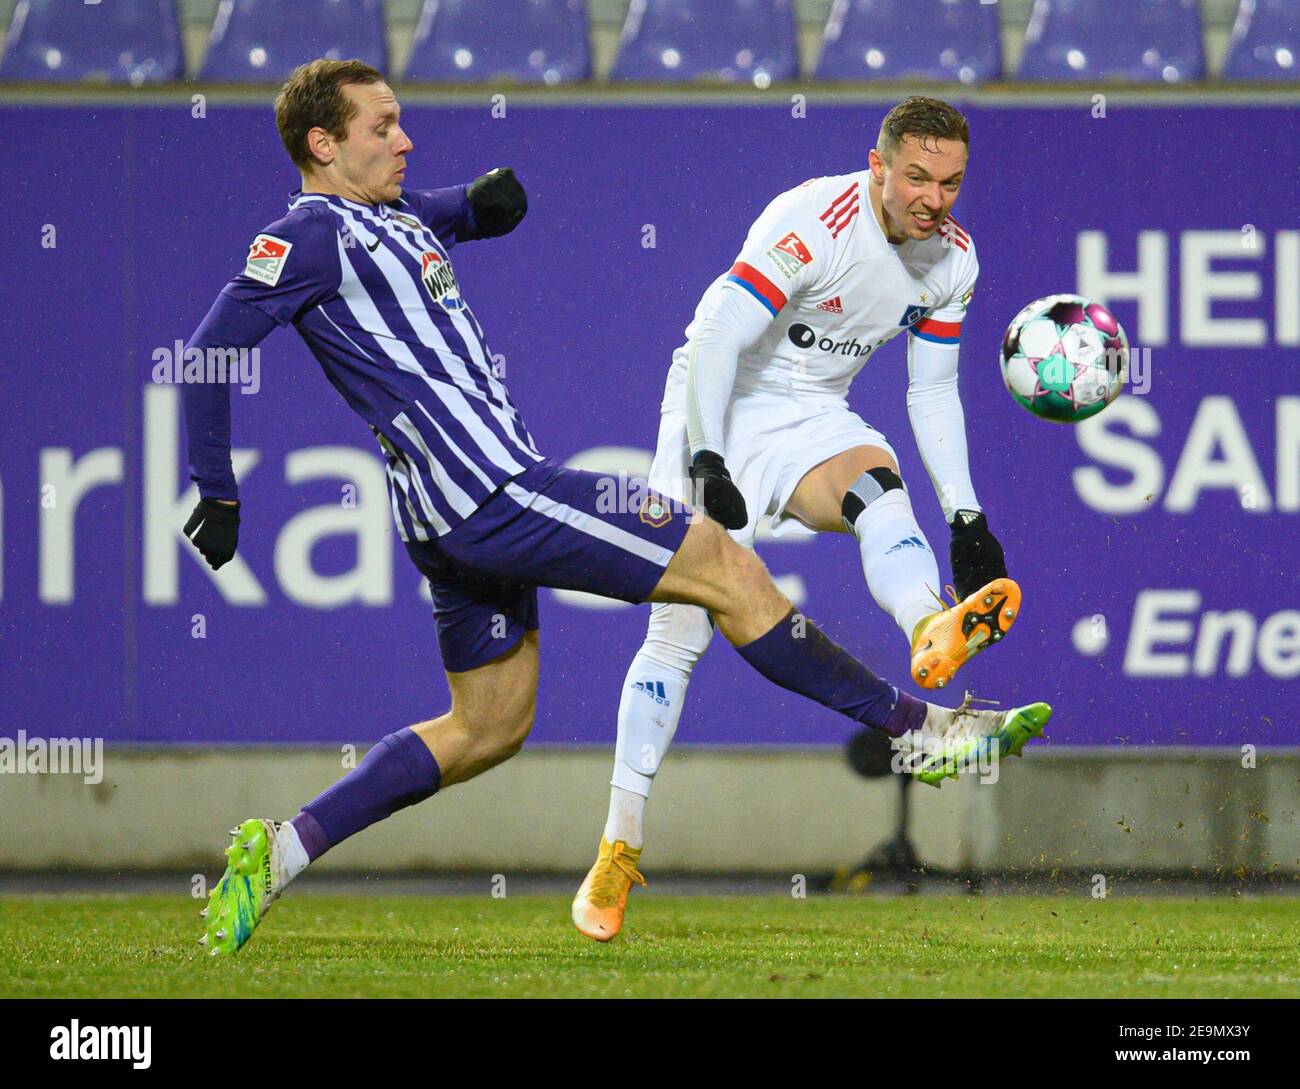 Aue, Germany. 05th Feb, 2021. Football: 2. Bundesliga, FC Erzgebirge Aue - Hamburger SV, Matchday 20, at Erzgebirgsstadion. Aue's Ben Zolinski (l) against Hamburg's Sonny Kittel. Credit: Robert Michael/dpa-Zentralbild/dpa - IMPORTANT NOTE: In accordance with the regulations of the DFL Deutsche Fußball Liga and/or the DFB Deutscher Fußball-Bund, it is prohibited to use or have used photographs taken in the stadium and/or of the match in the form of sequence pictures and/or video-like photo series./dpa/Alamy Live News Stock Photo